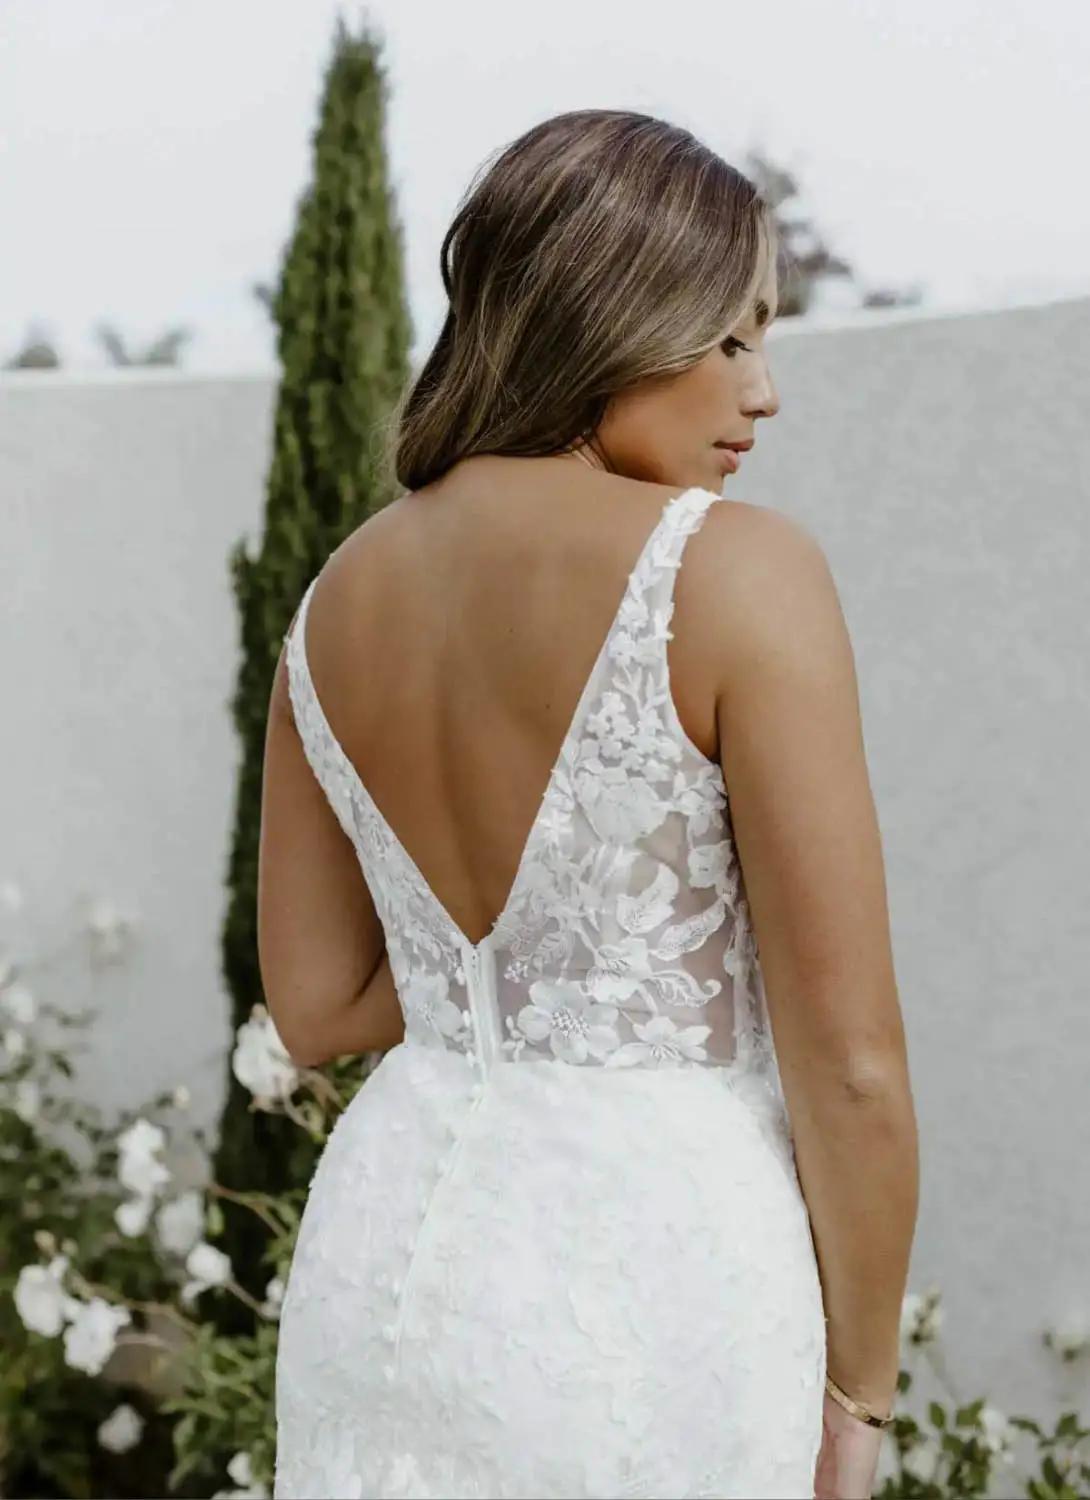 …THIS IS MORE THAN JUST A WEDDING DRESS.